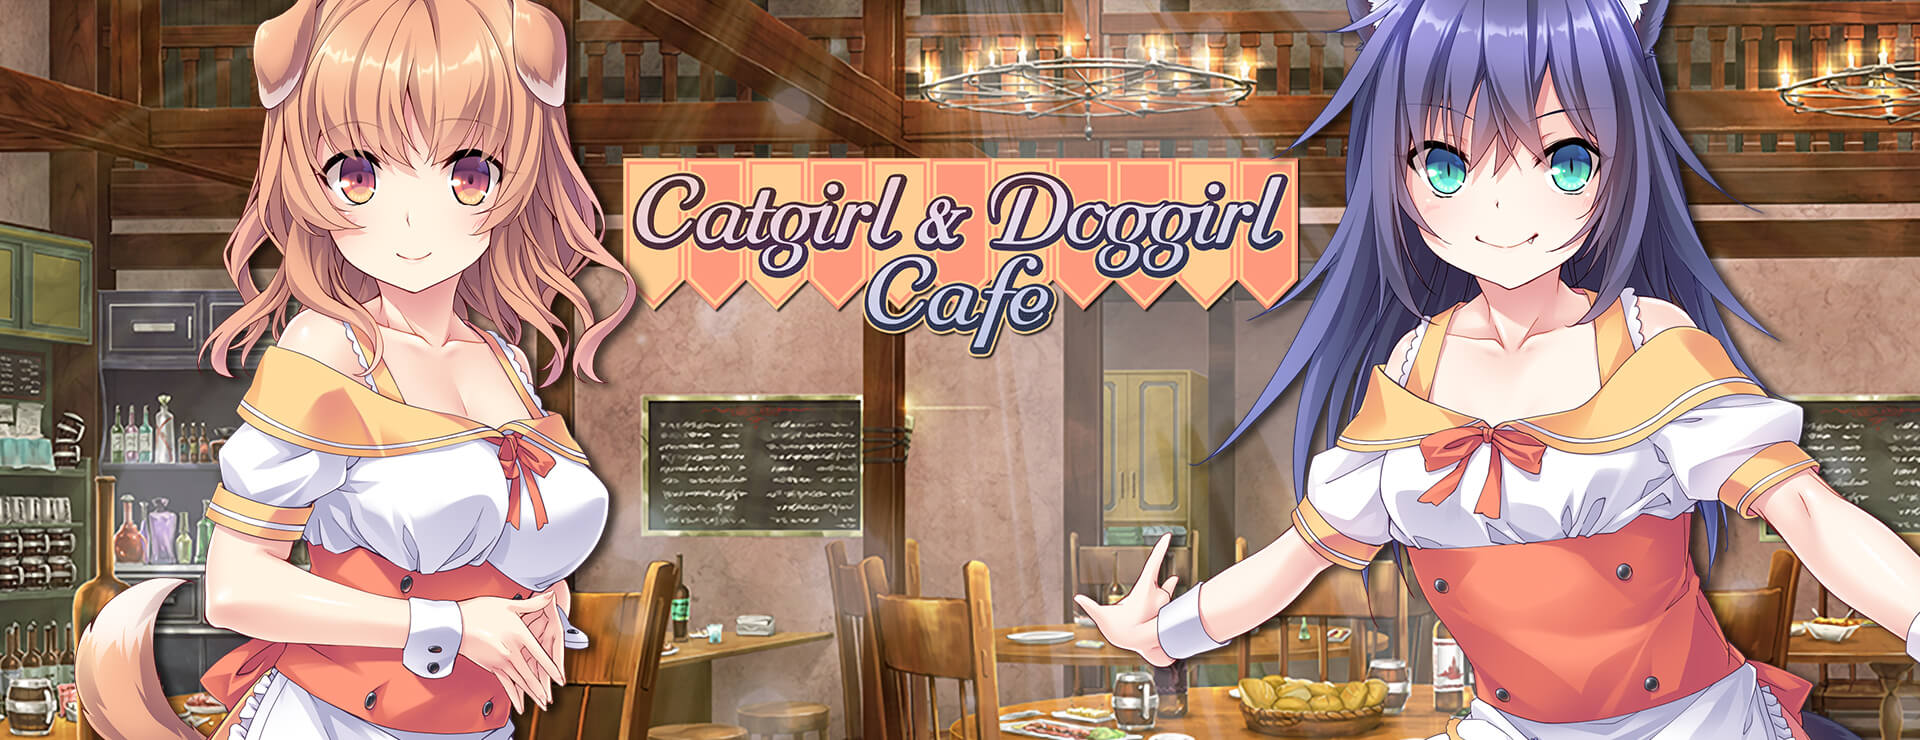 Catgirl and Doggirl Cafe - 虚拟小说 遊戲